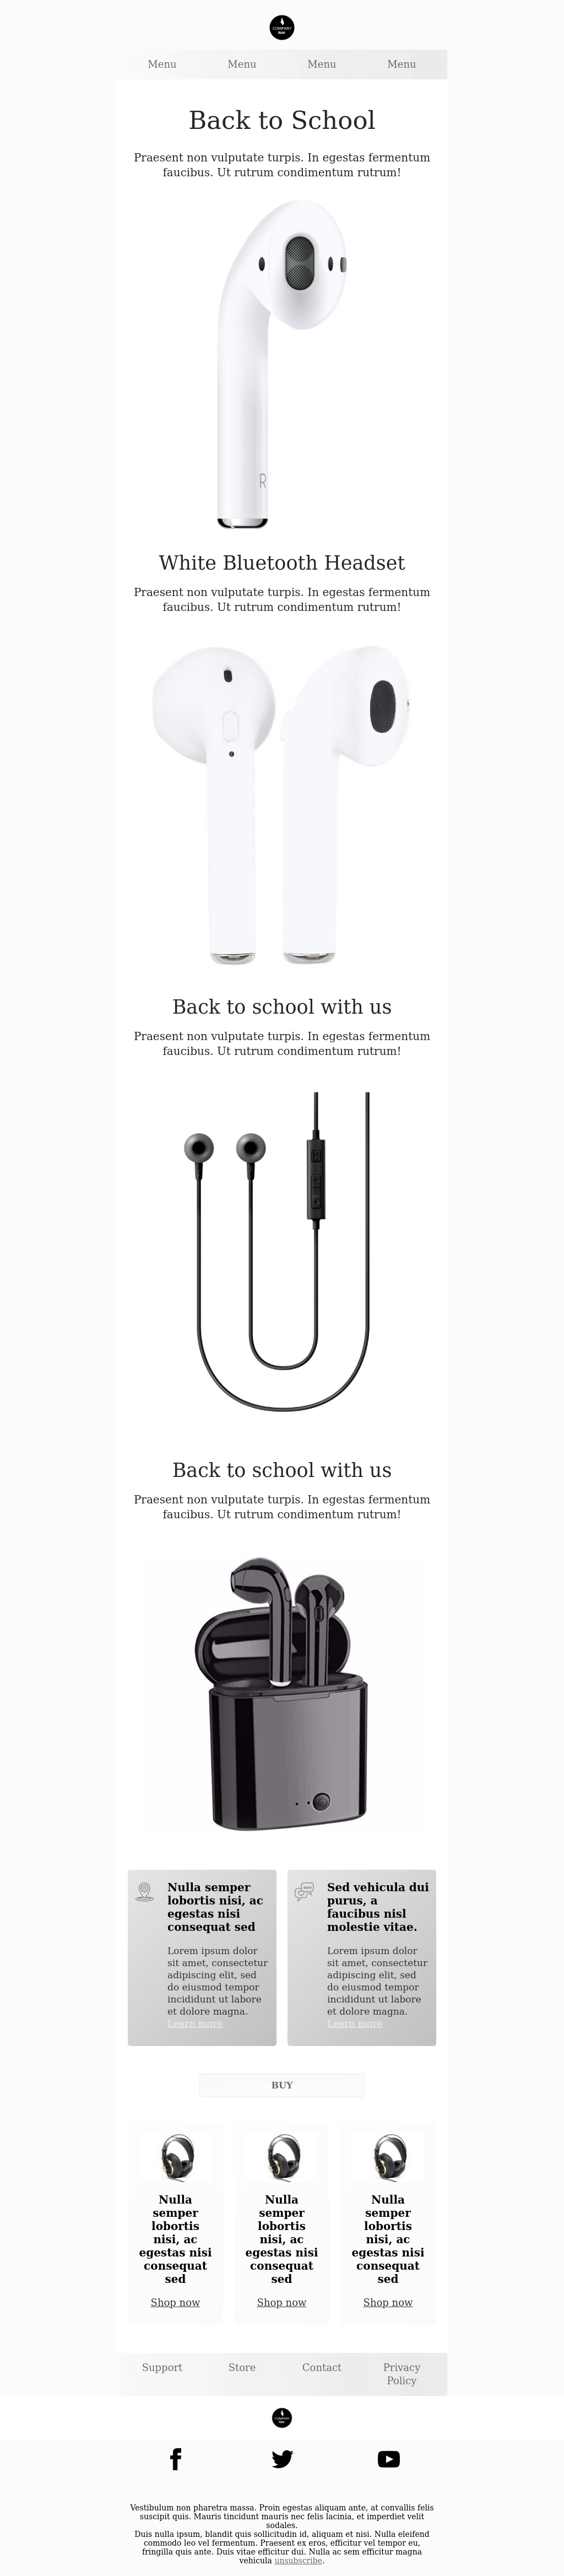 Simple Product Promo Back to School